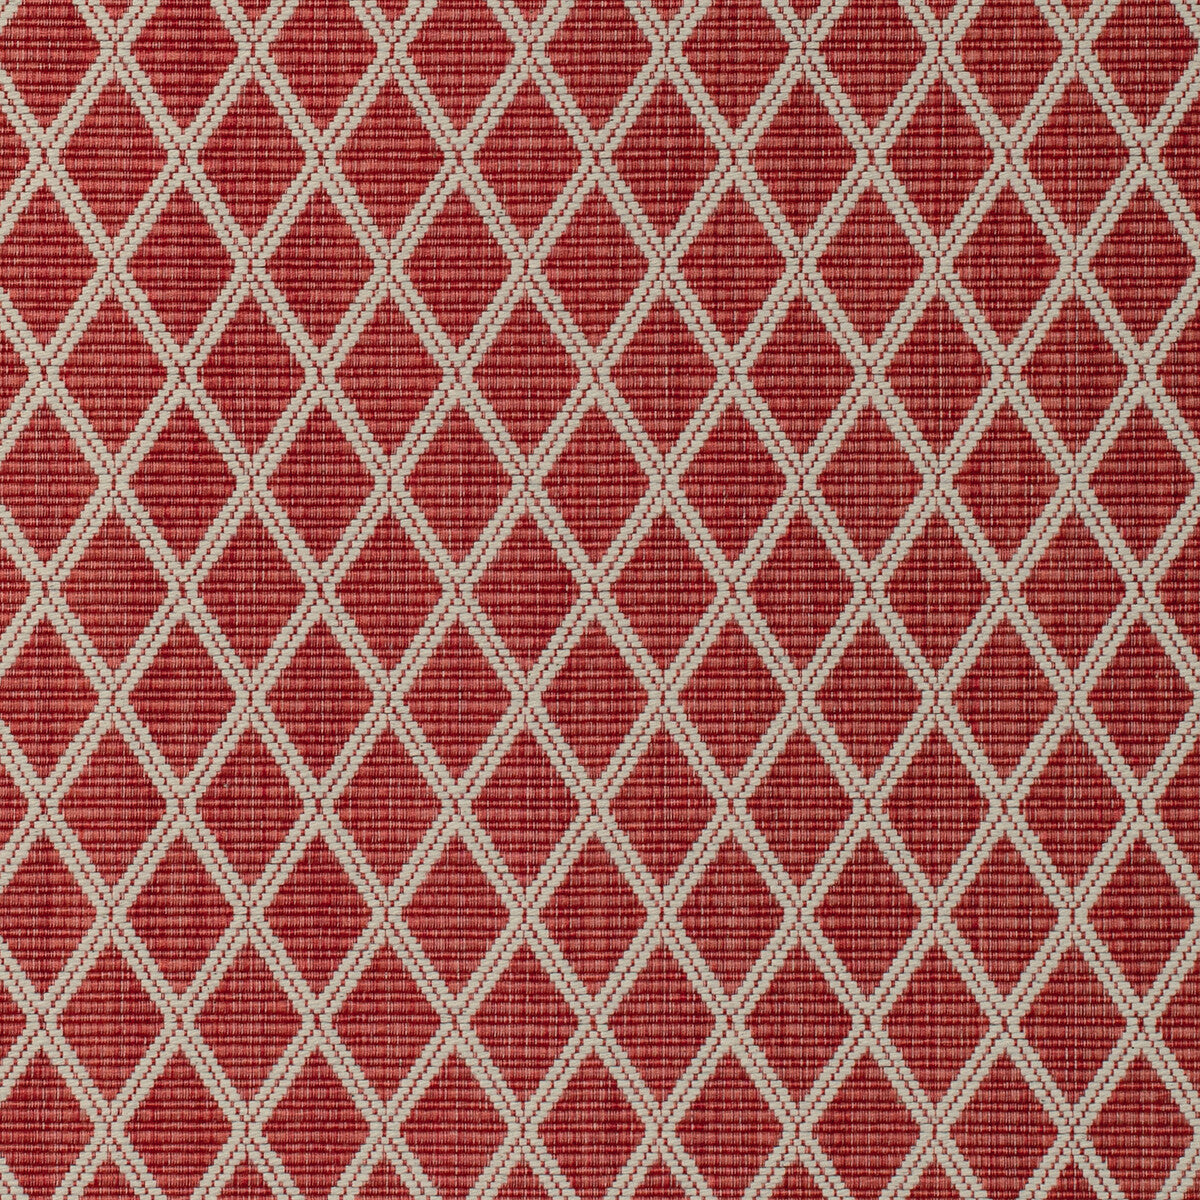 Cancale Woven fabric in red color - pattern 8020109.19.0 - by Brunschwig &amp; Fils in the Granville Weaves collection